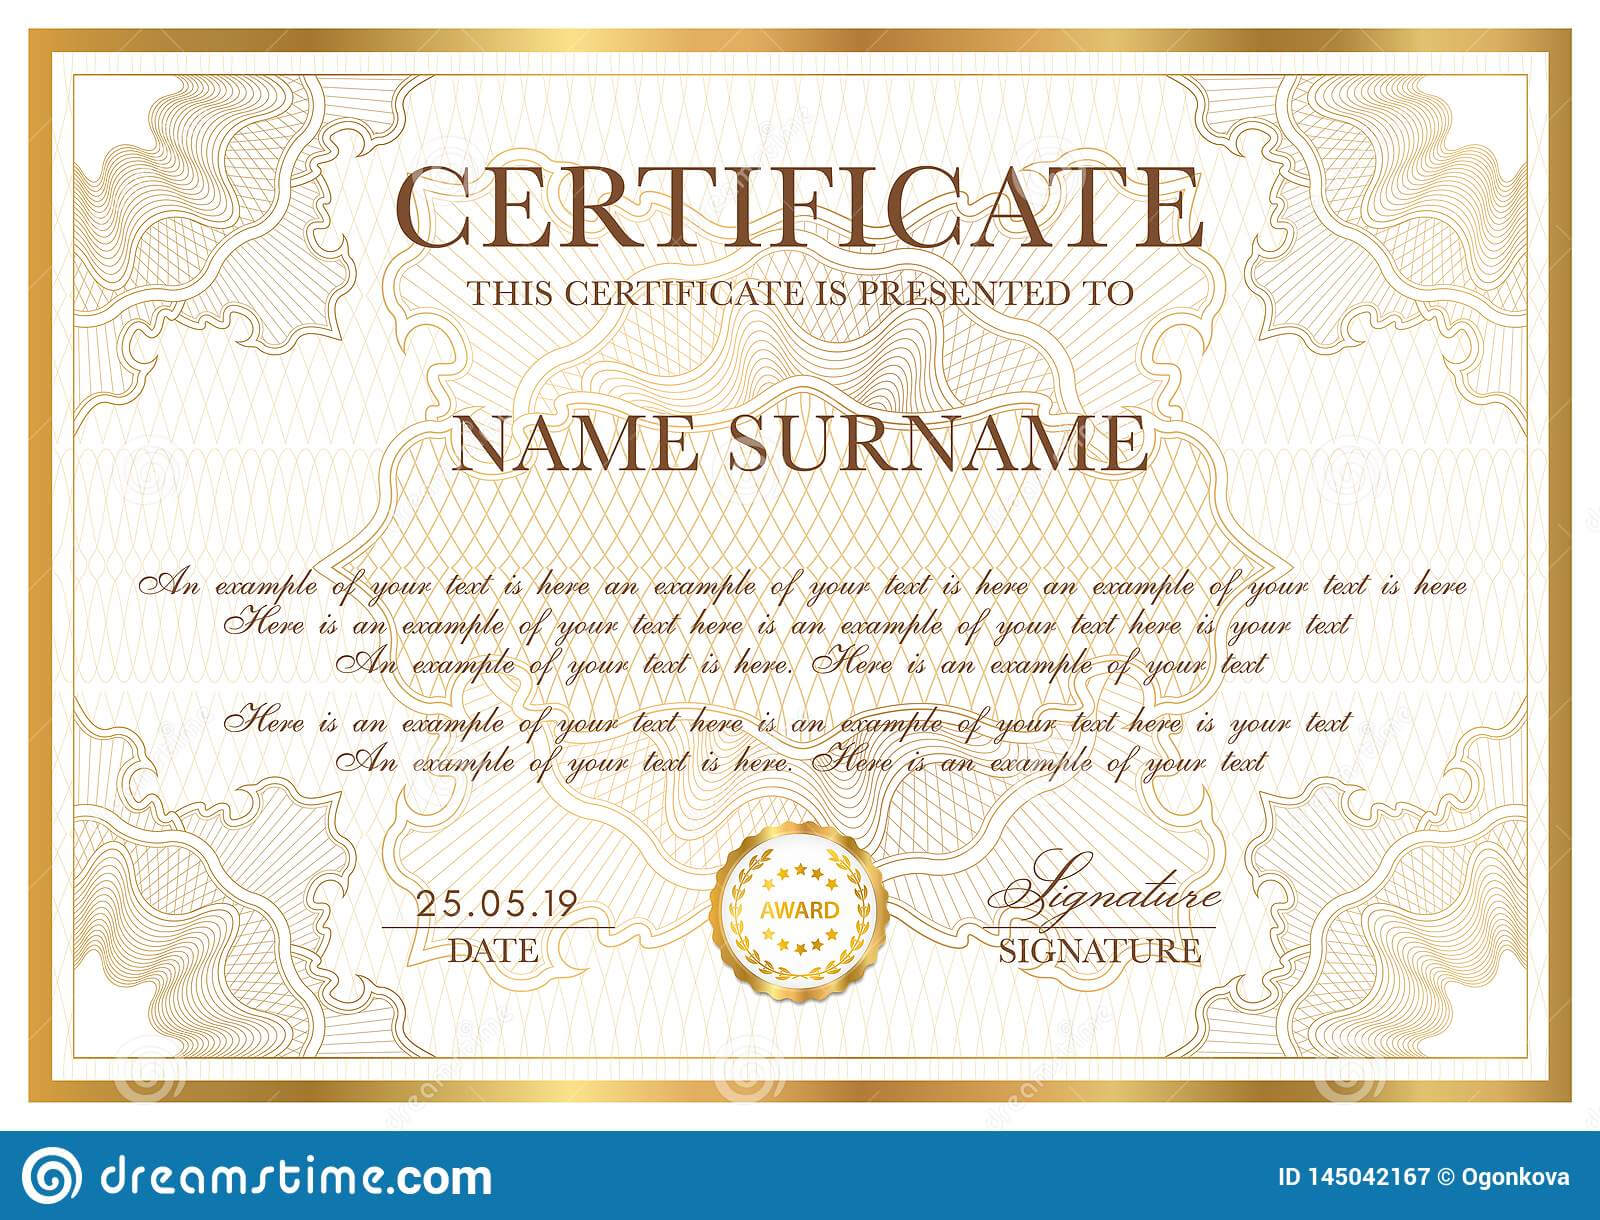 Certificate Template. Gold Border With Guilloche Pattern Within Certificate Of Authenticity Template